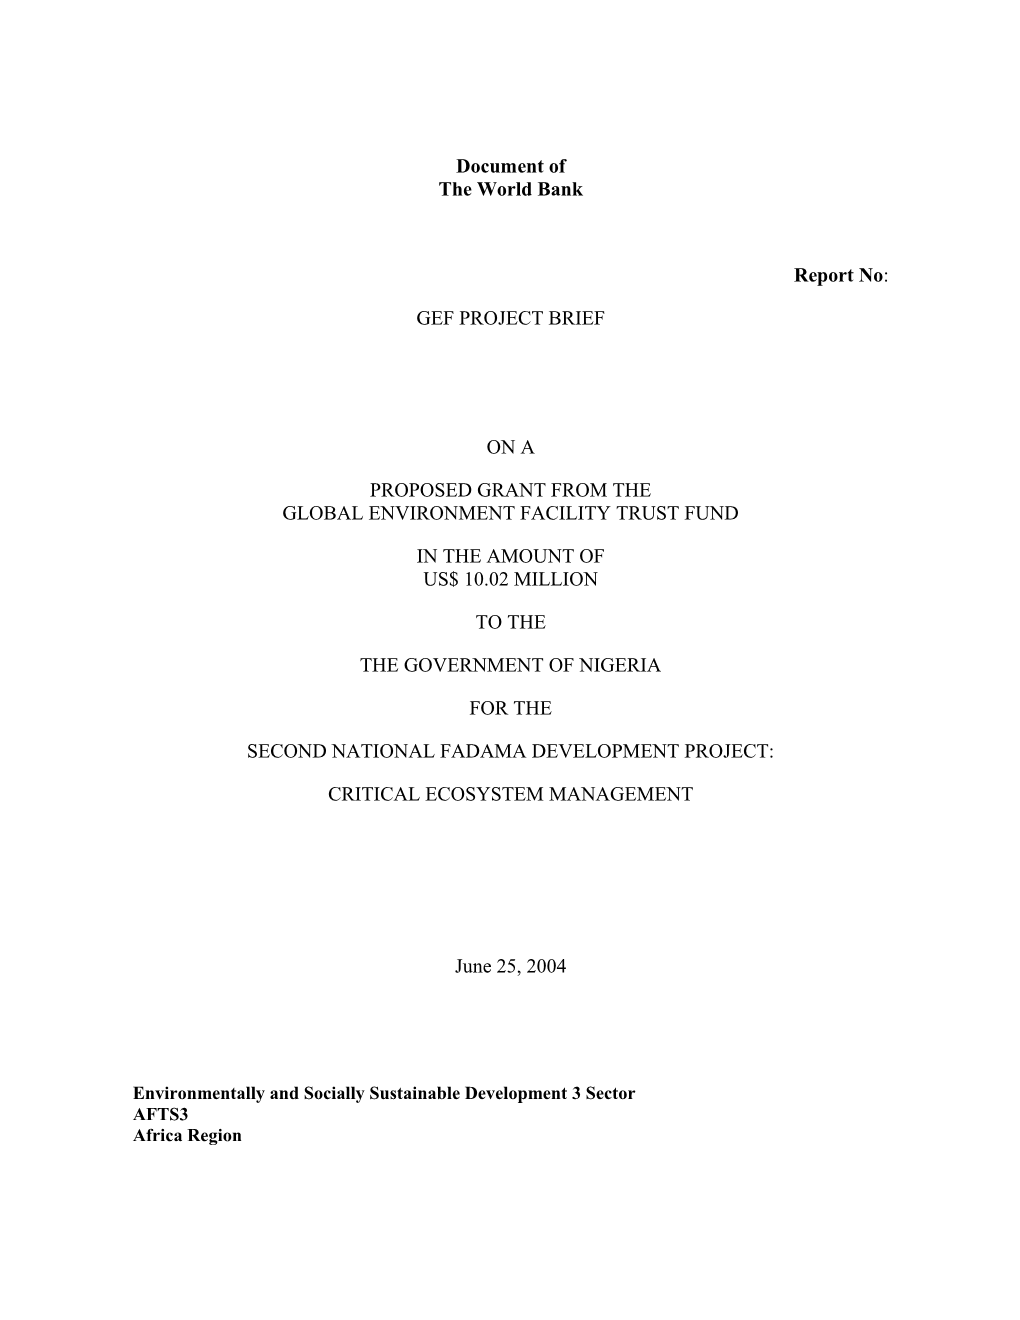 Table of Contents of the Project Appraisal Document (Pad)